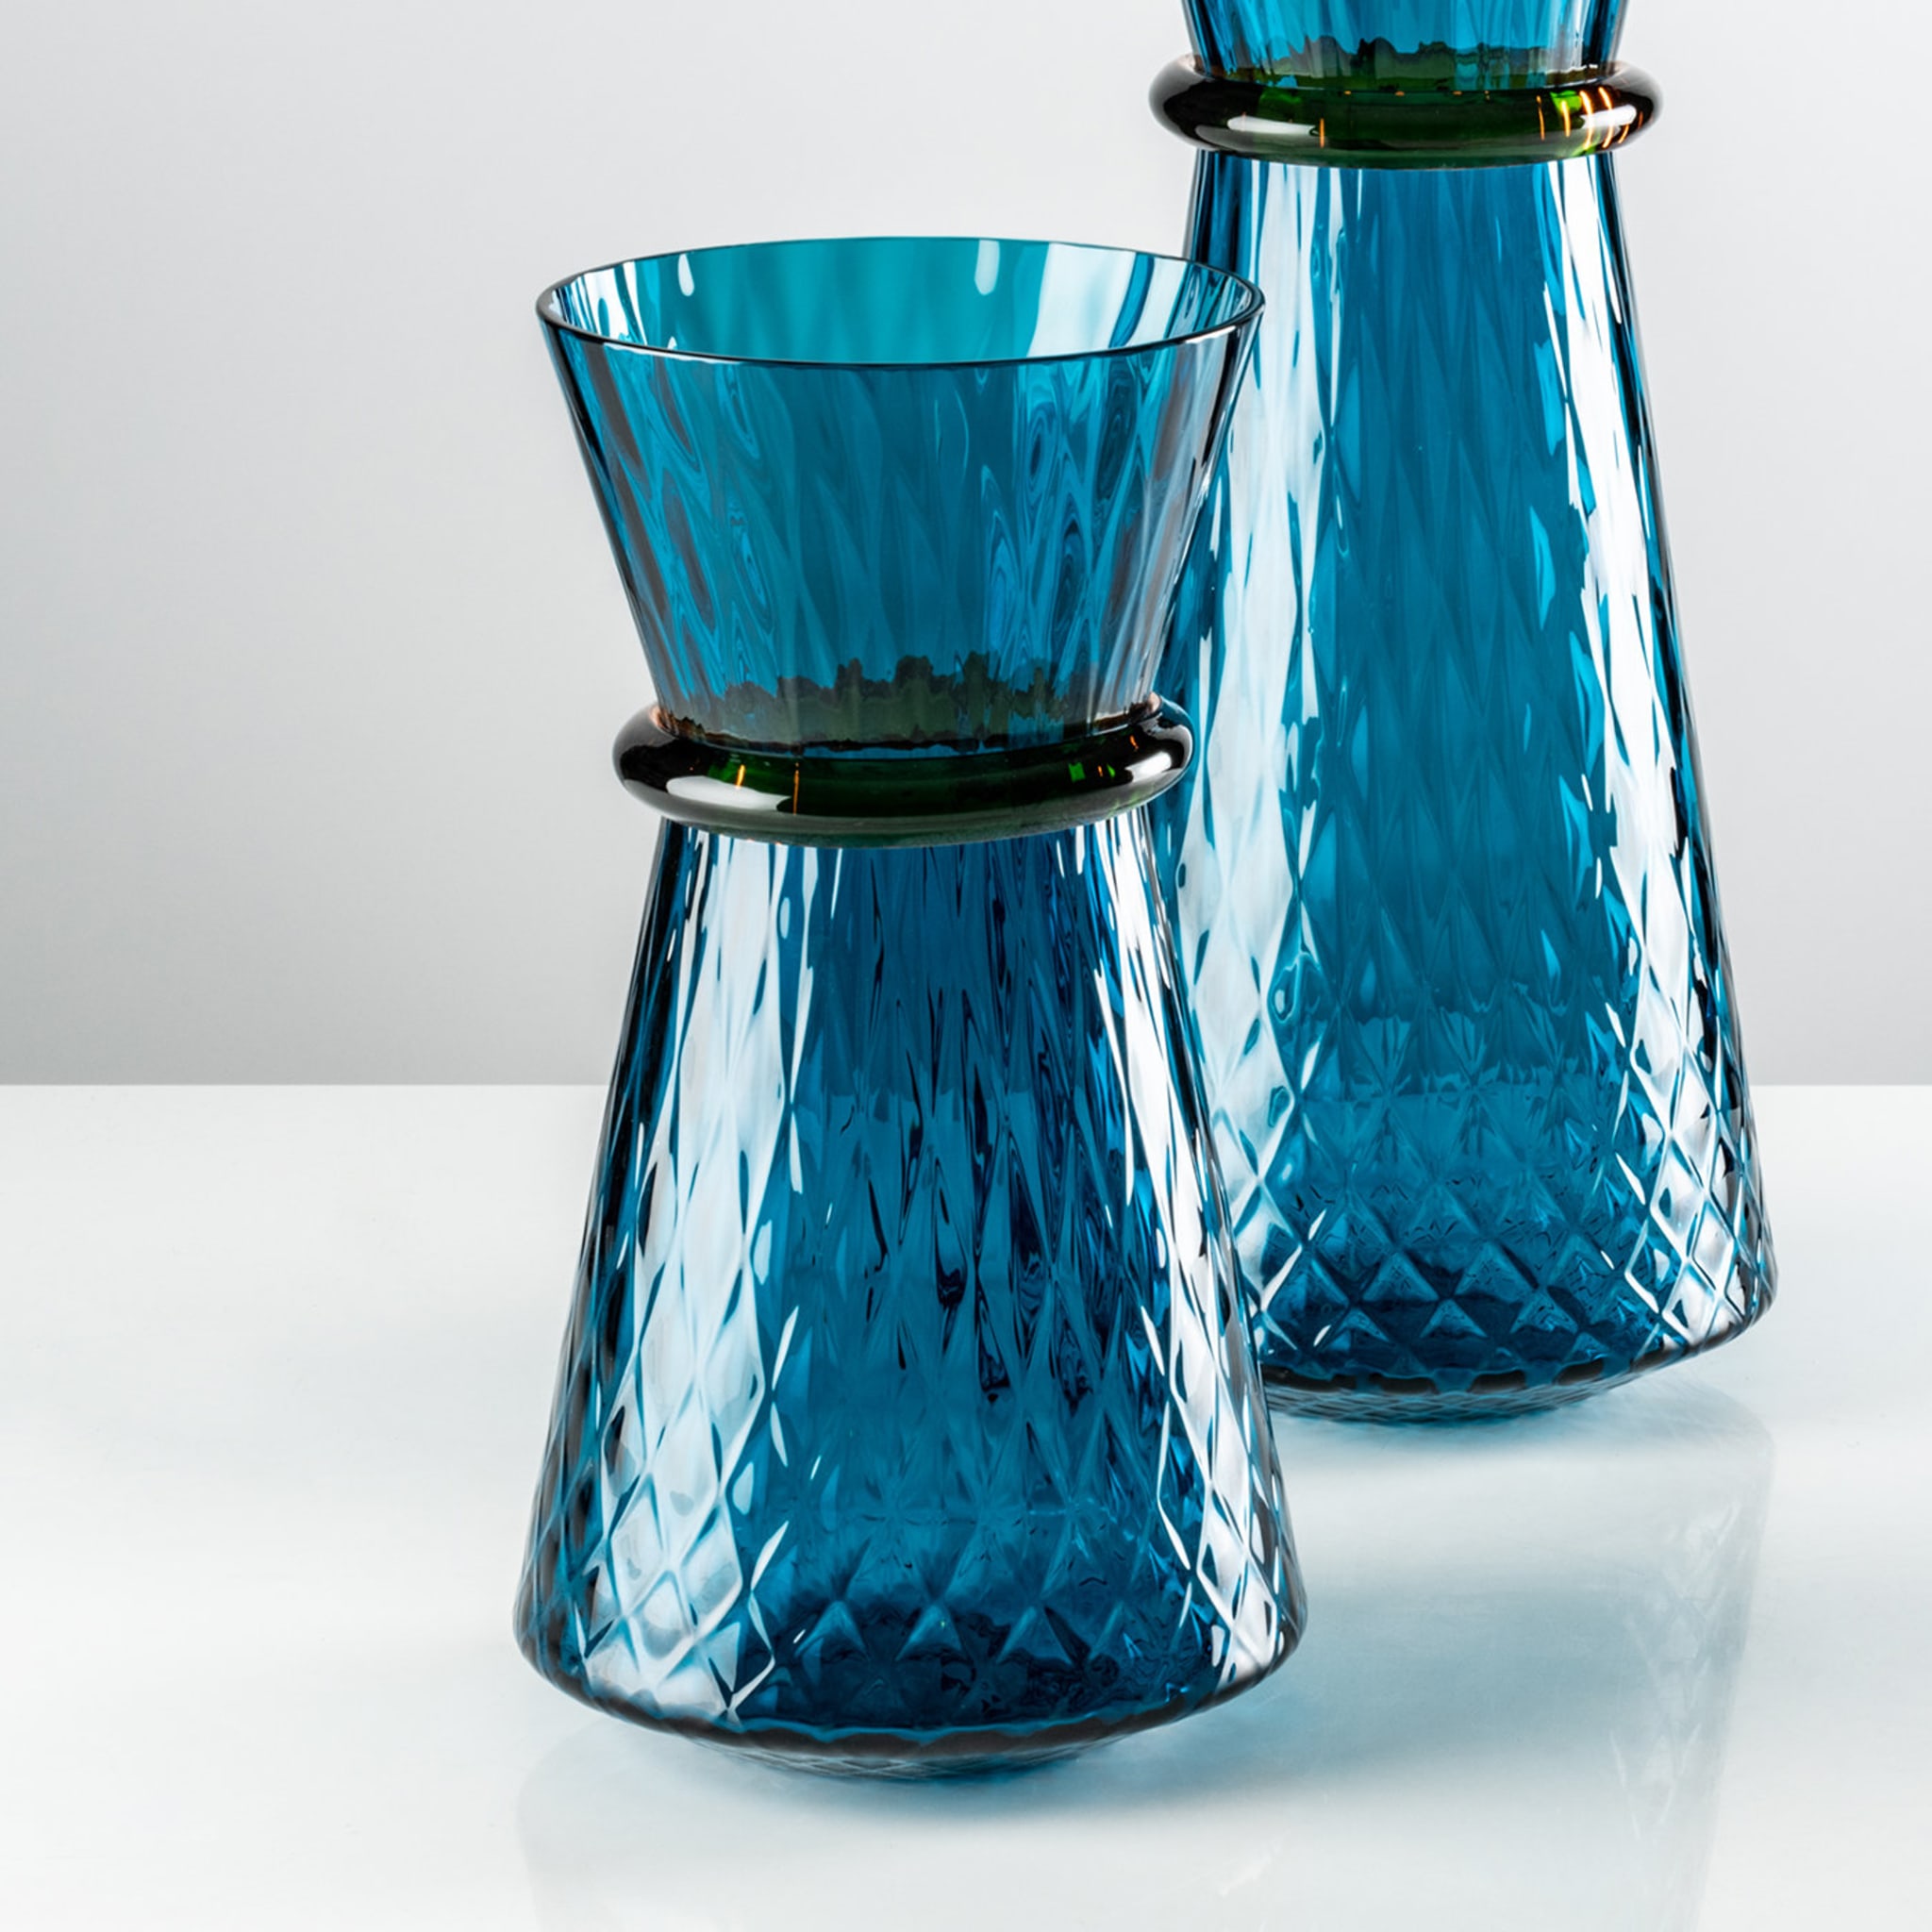 Tiara Small Blue Vase by Francesco Lucchese - Alternative view 1